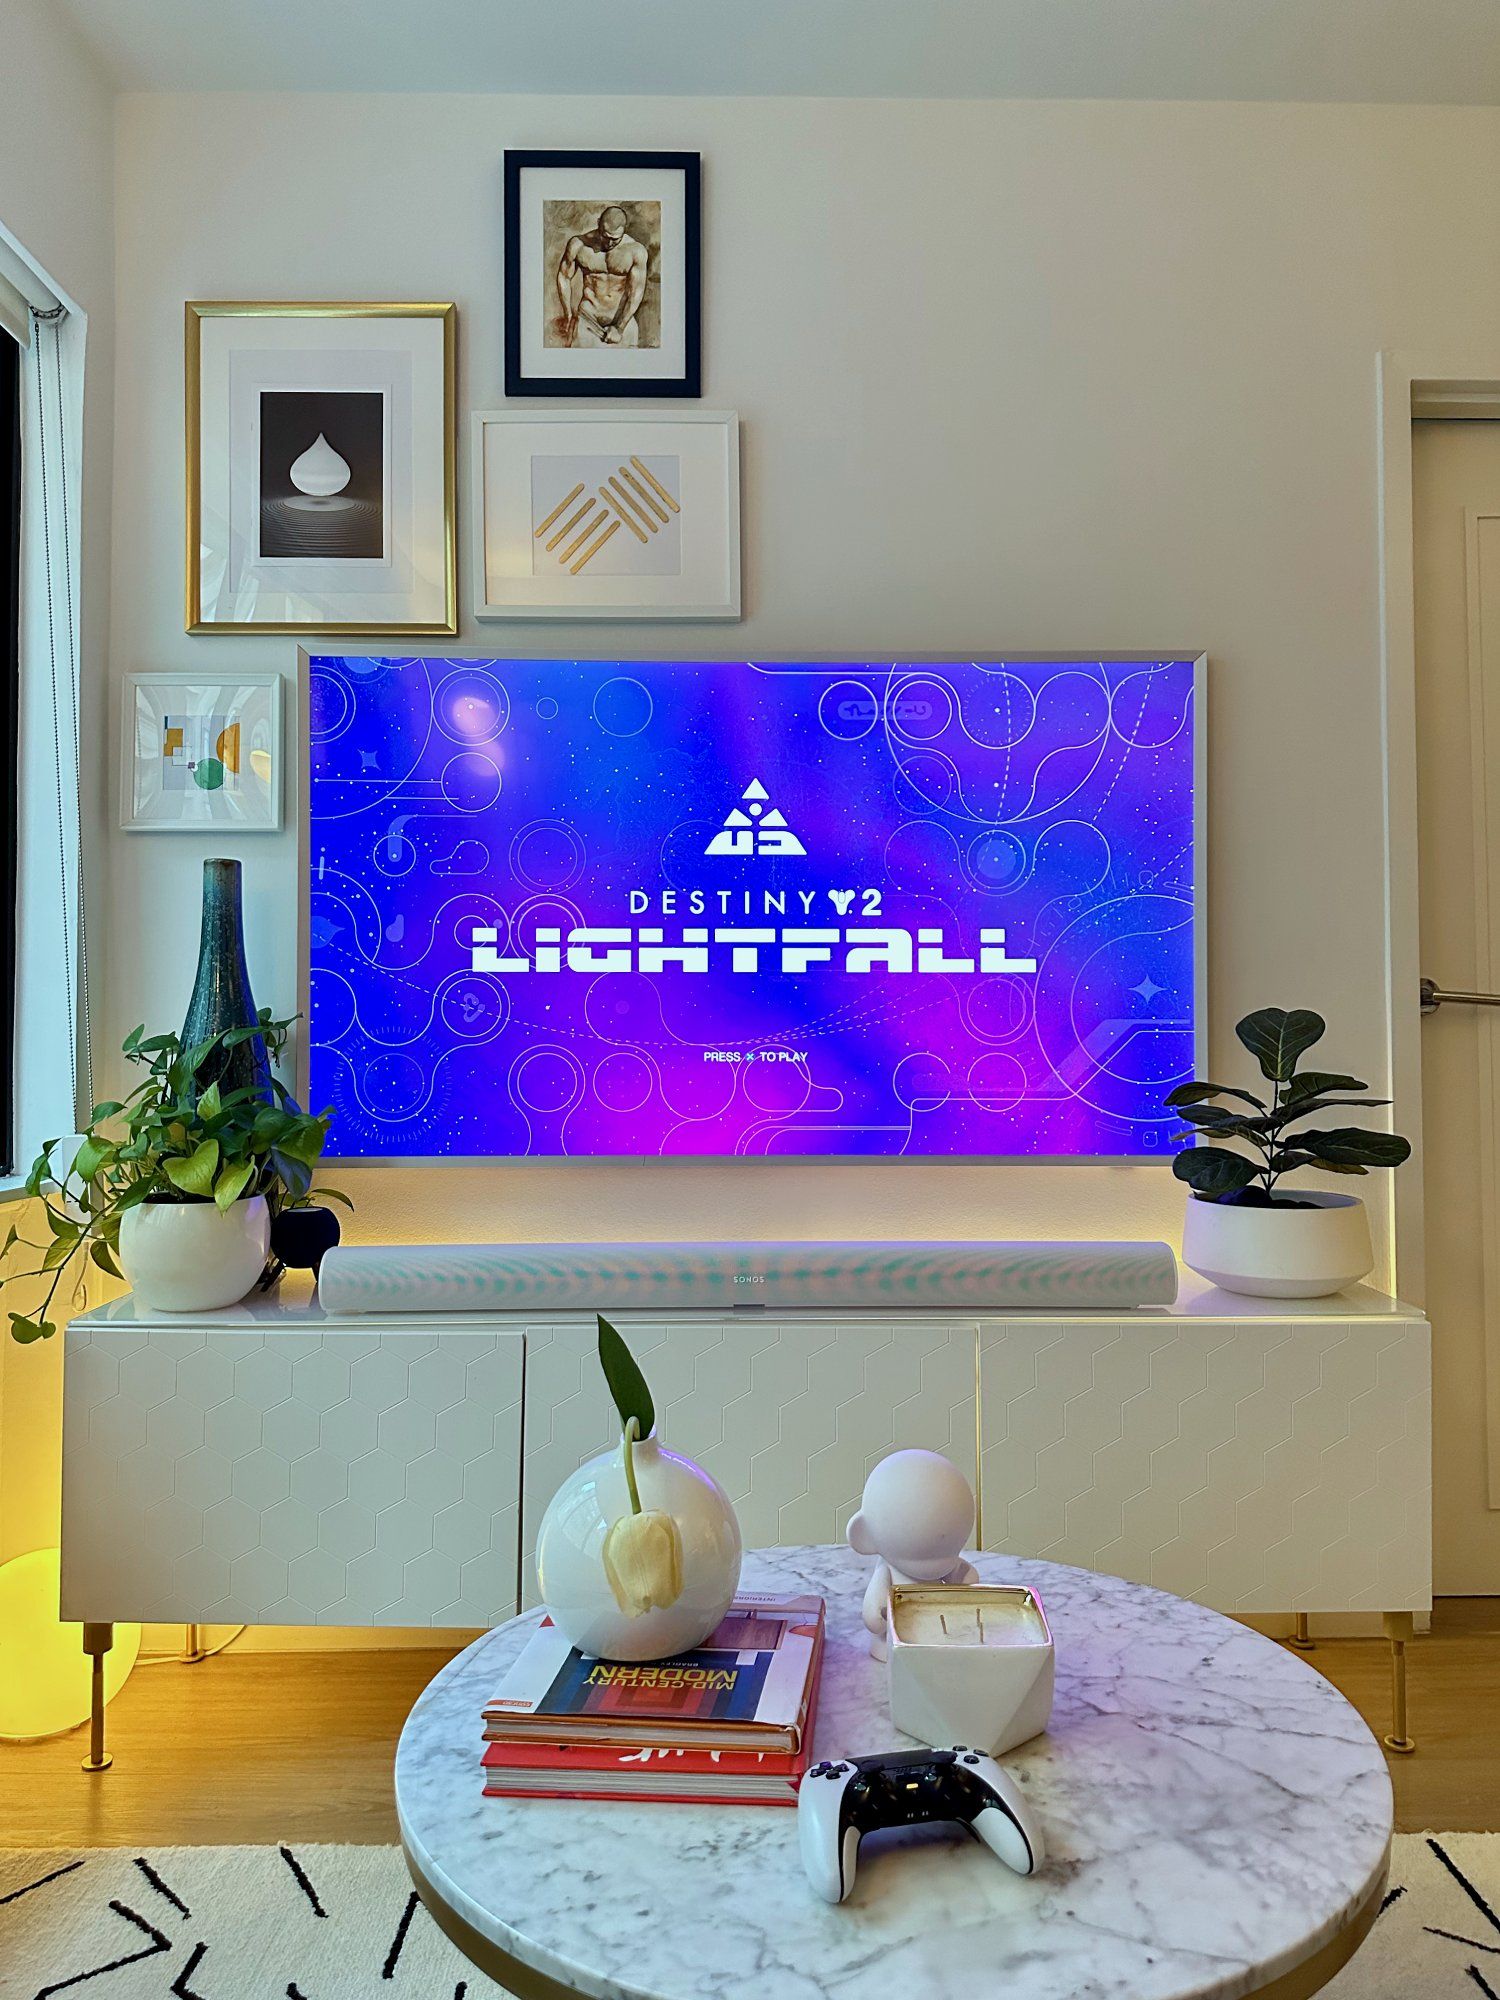 A large TV screen displaying the game Destiny 2: Lightfall for PS5, alongside a marble side table with some books, a vase, and a game controller